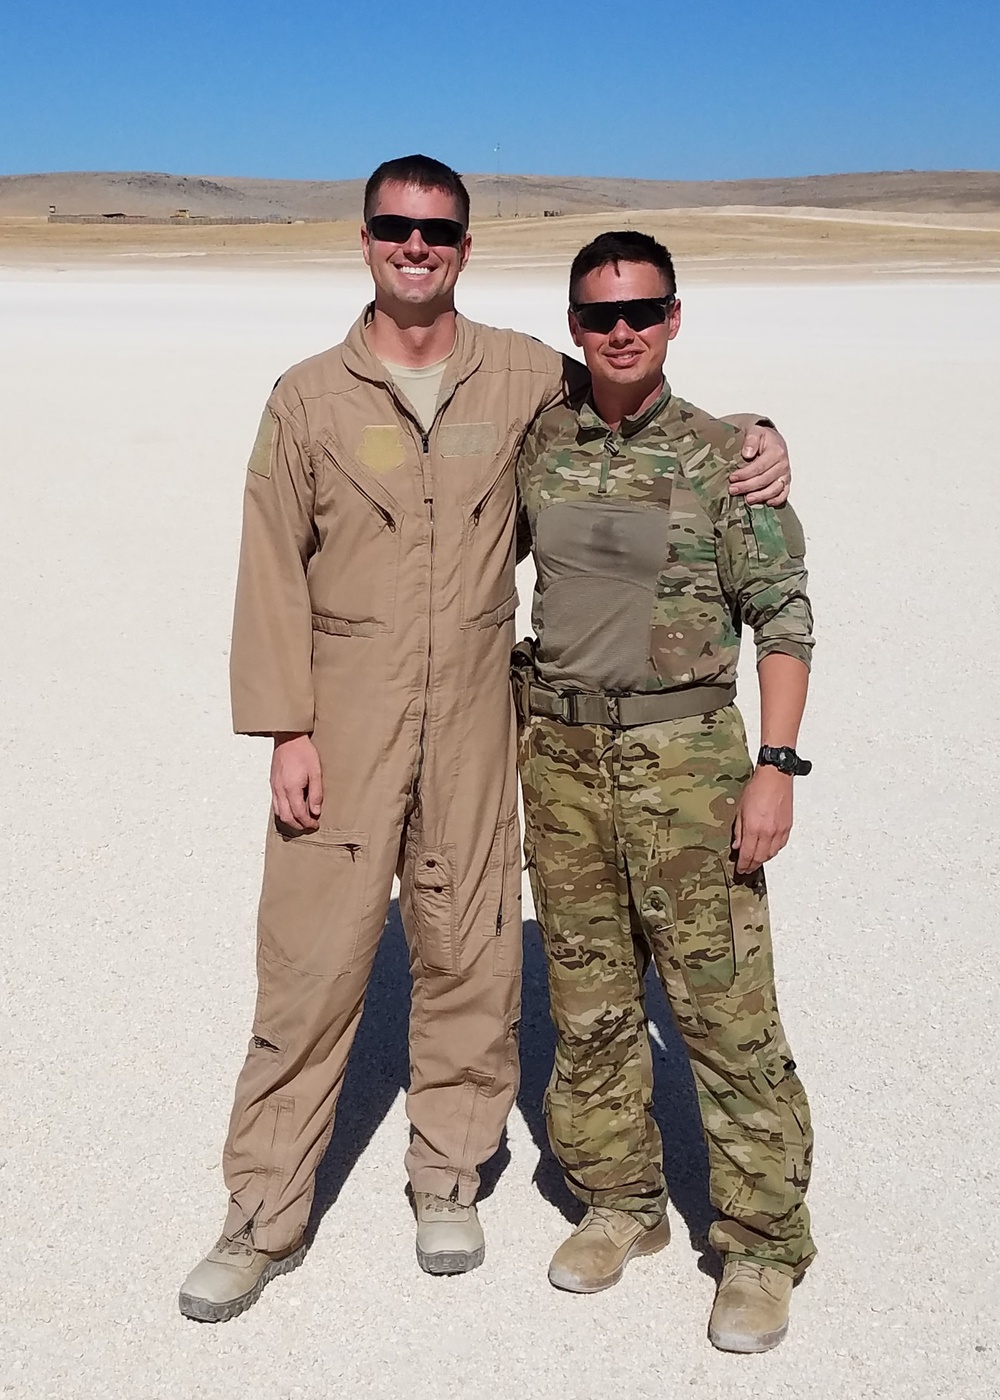 Brother’s in life, brother’s in-arms reunite downrange